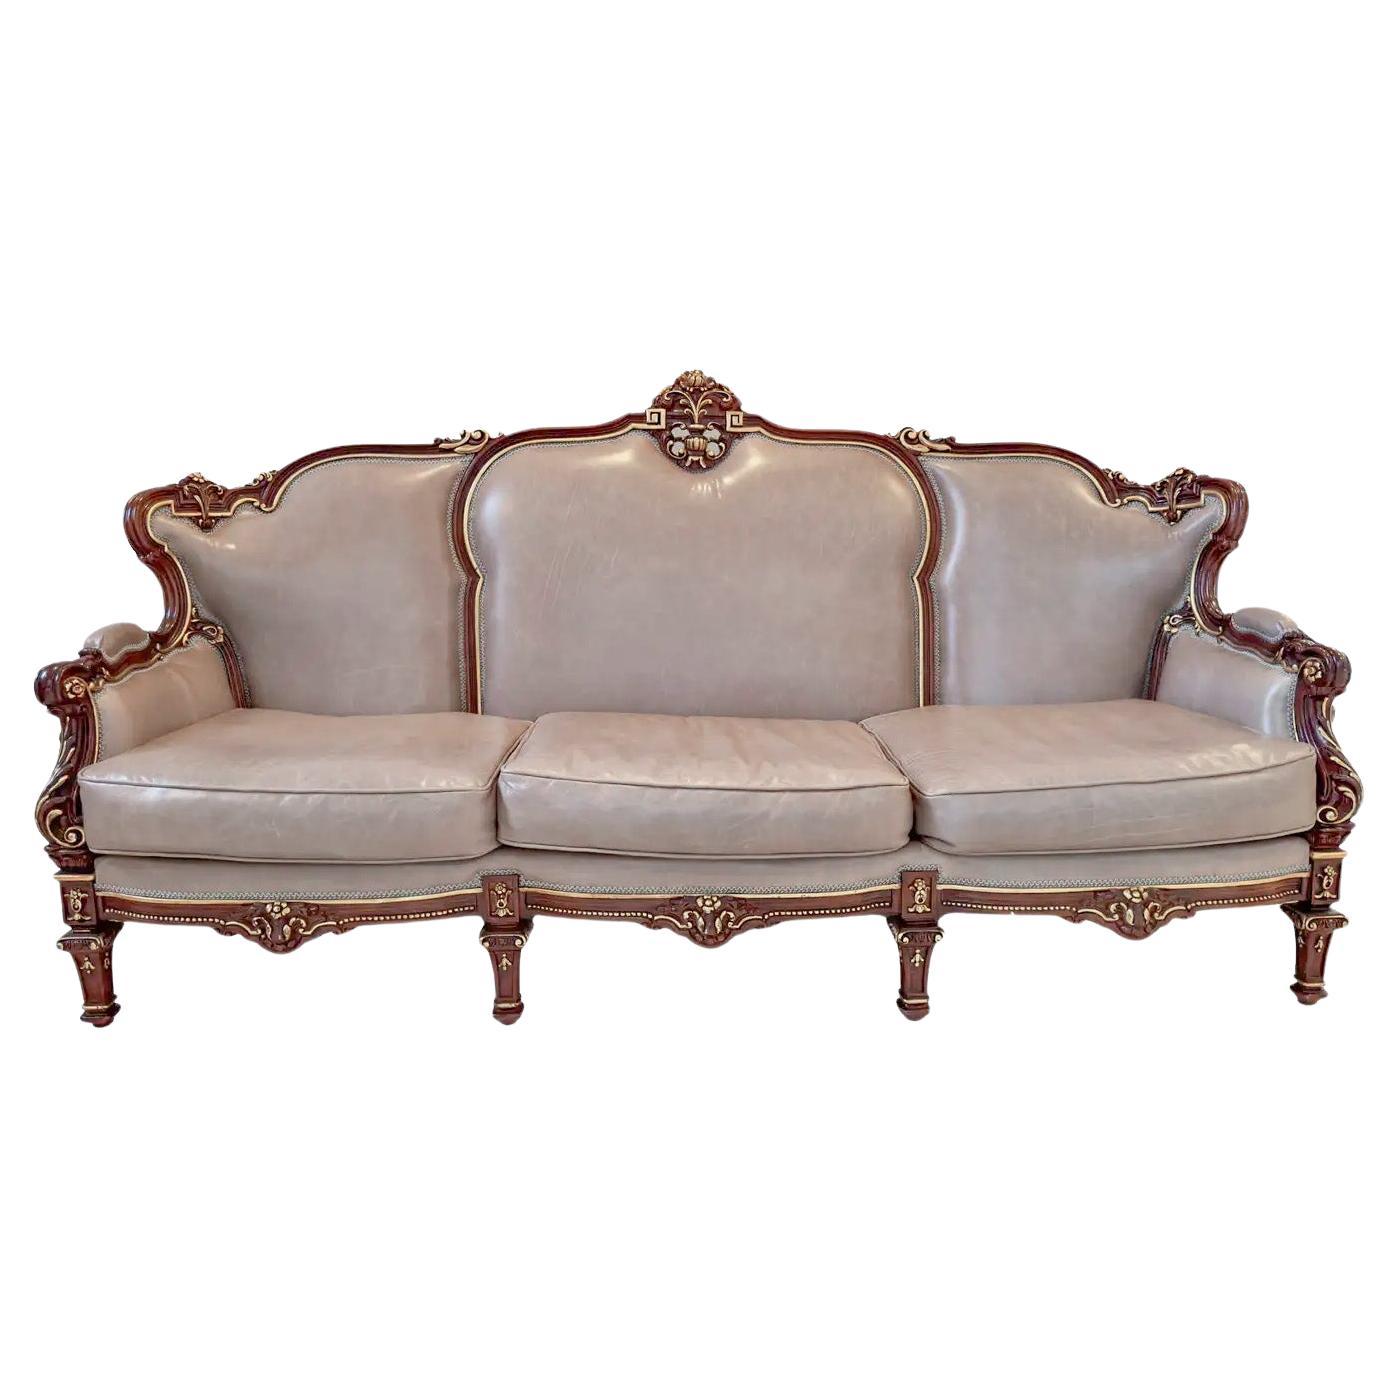 Italian Rococo Style Sofa in Fine Taupe / Gray Leather Upholstery and Mahogany  For Sale